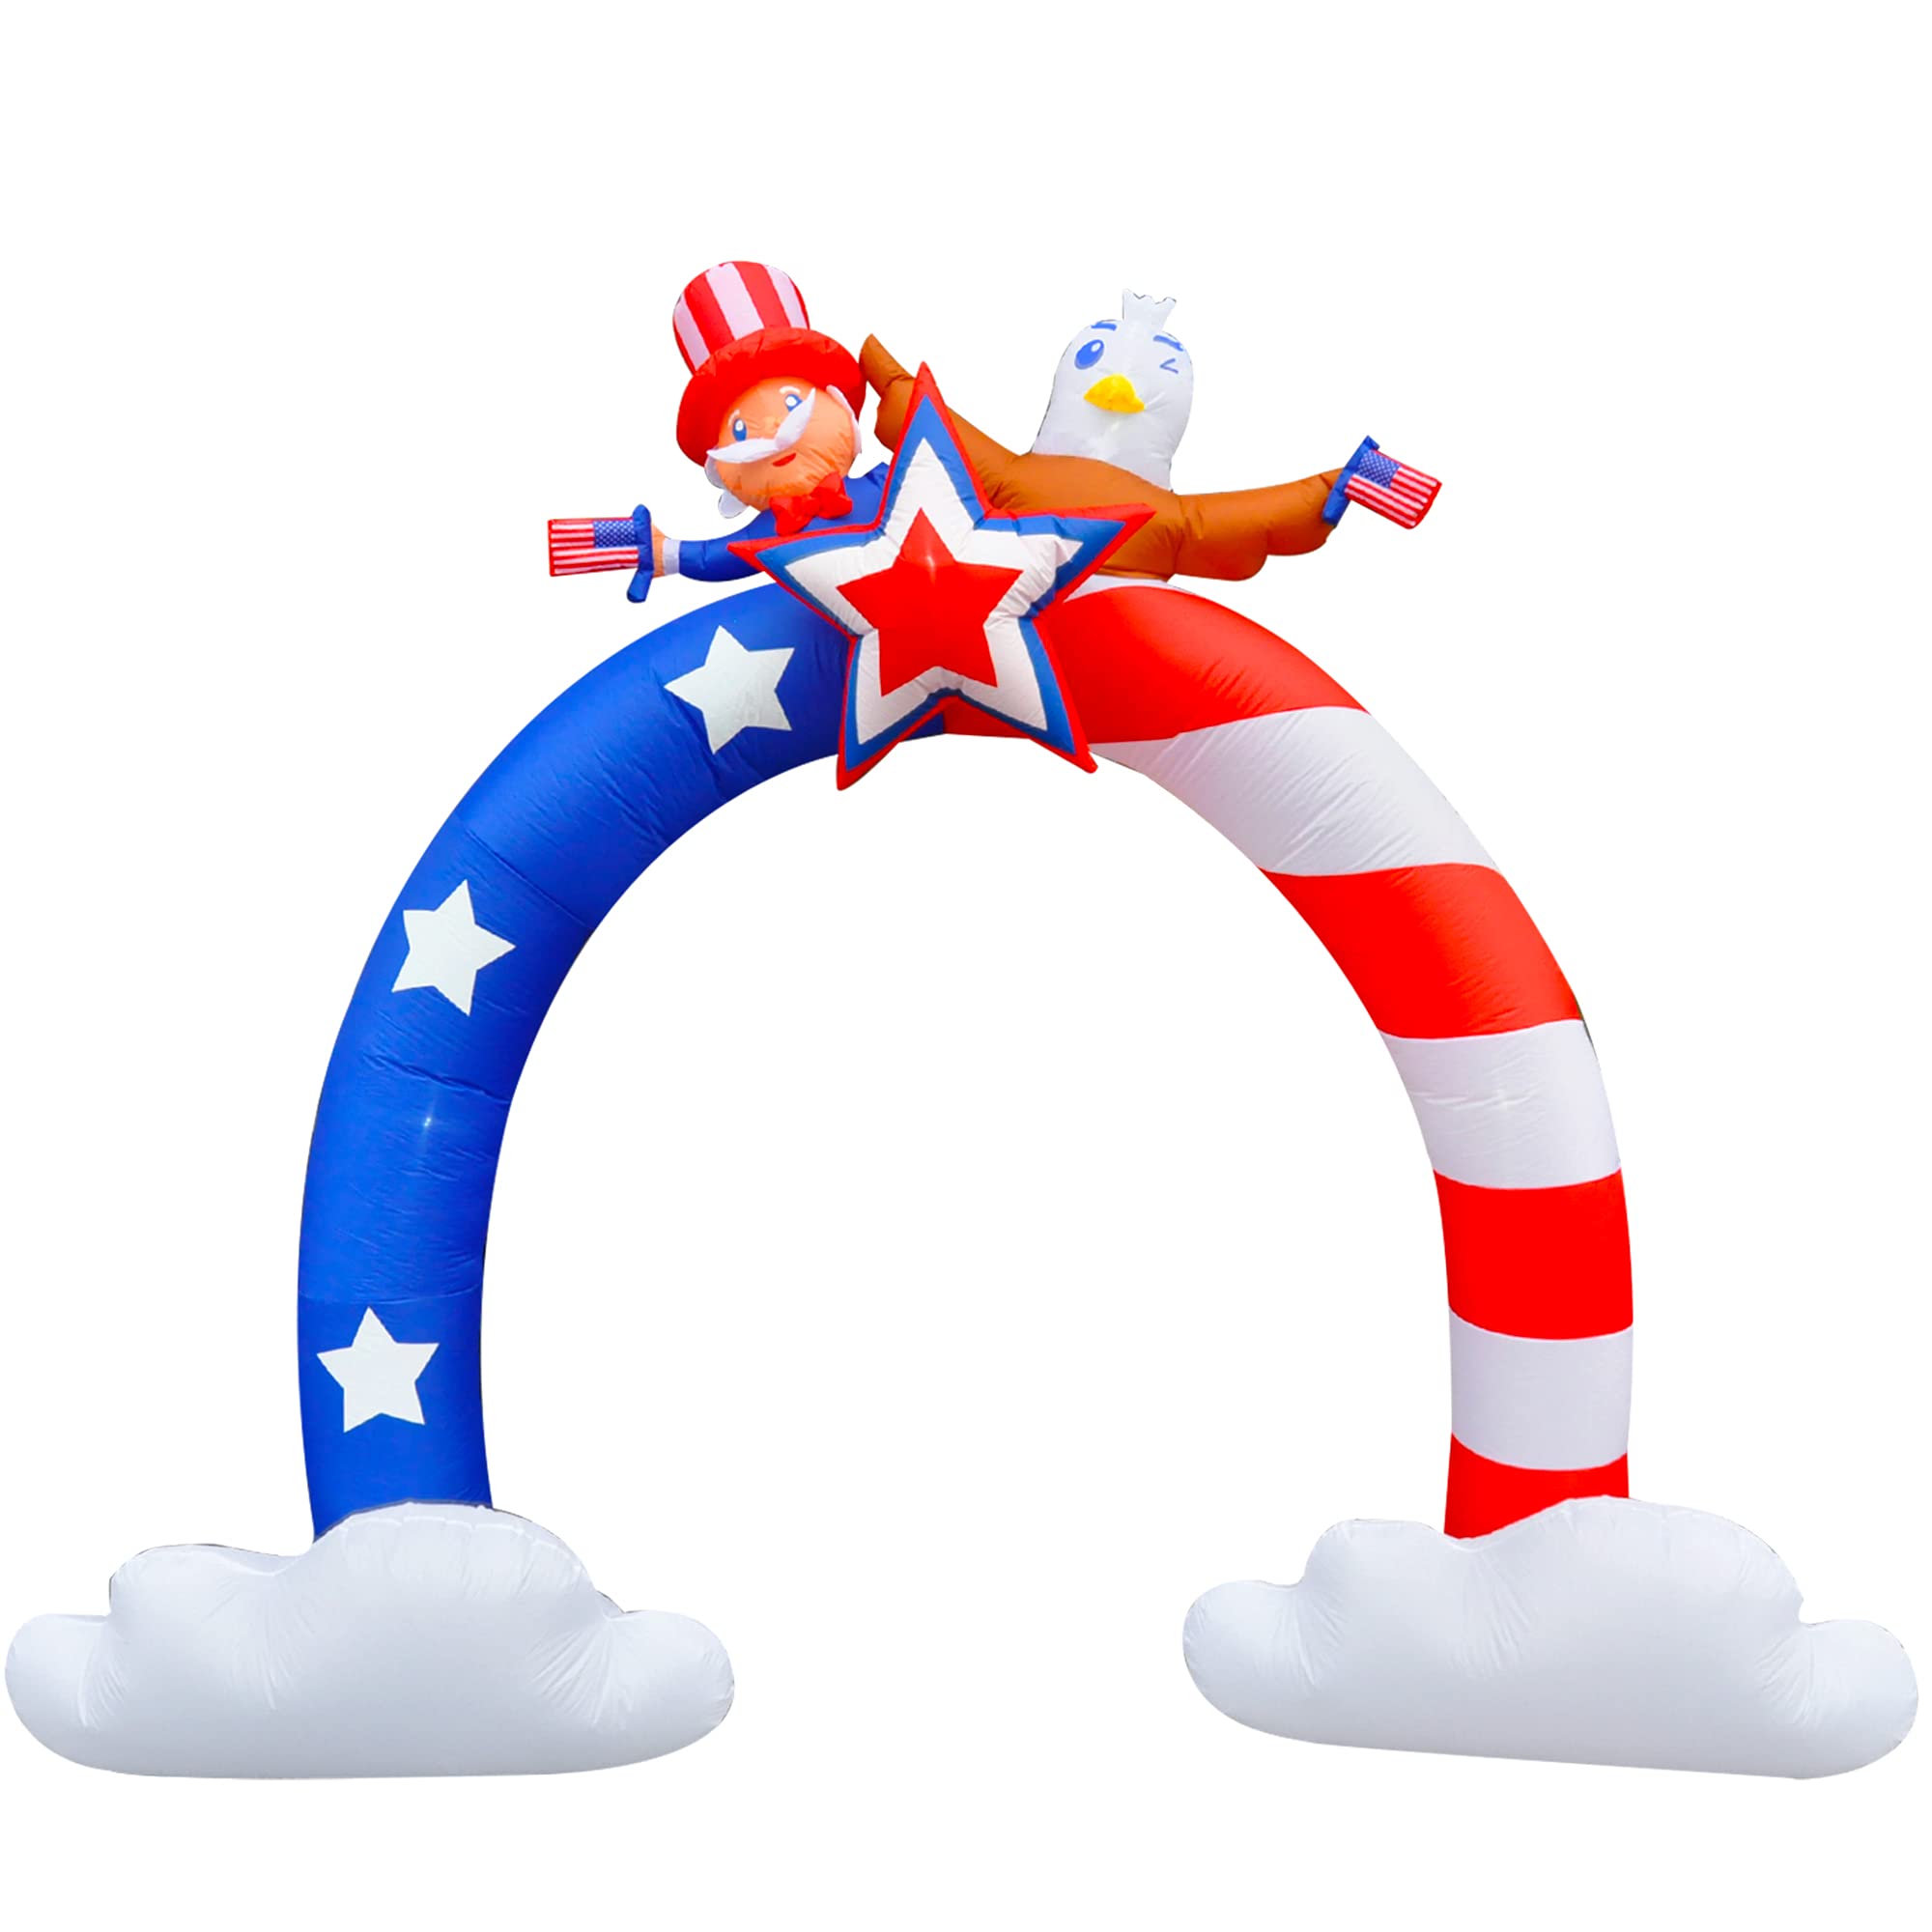 12Ft Patriotic Independence Day 4th of July Inflatable Archway Uncle Sam and Flying Bald Eagle with American Flag Archway Bulit-in LED Blow-up Outdoor Indoor Garden Yard Home Car Holiday Decoration